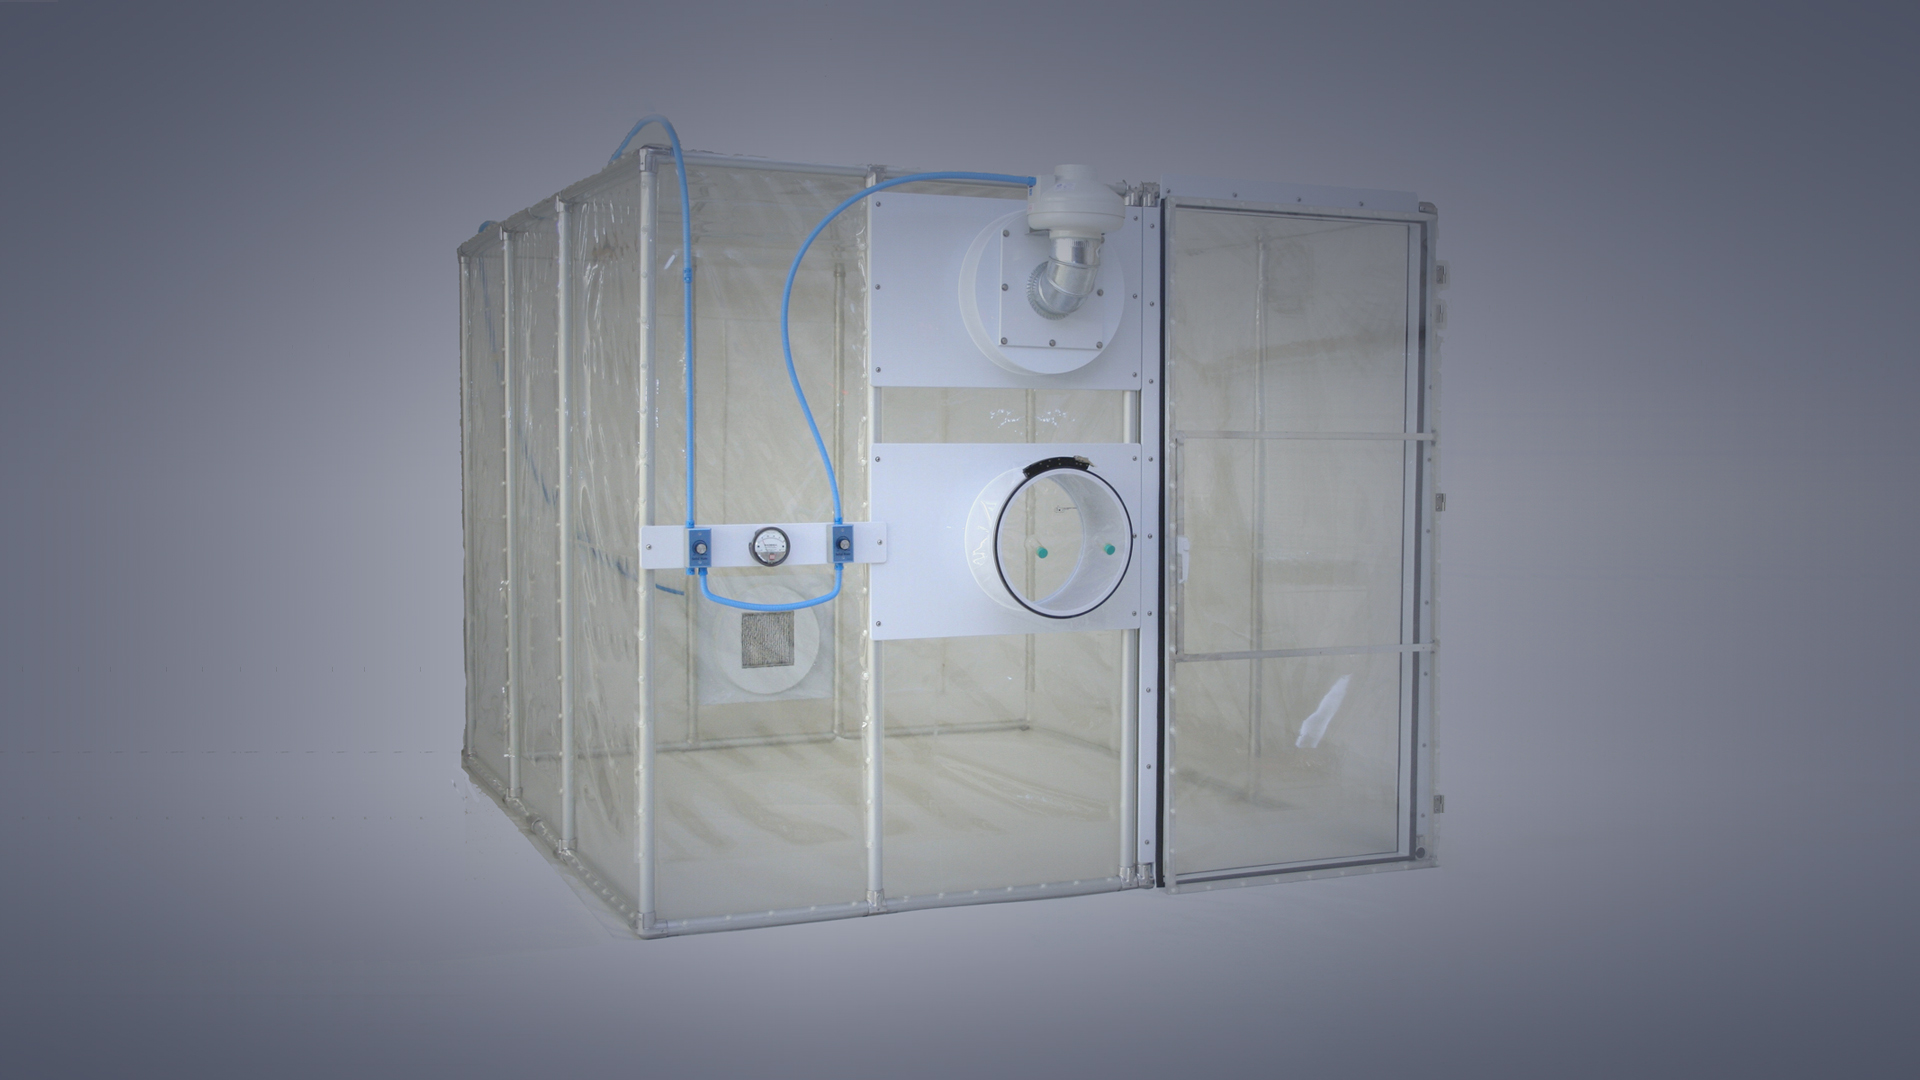 Pictured is a negative pressure, flexible film (softwall) containment unit that is designed to be a necropsy room, with enough space for a necropsy table, waterline, discharge collection and pass in/out transfer port (restricted access barrier unit).